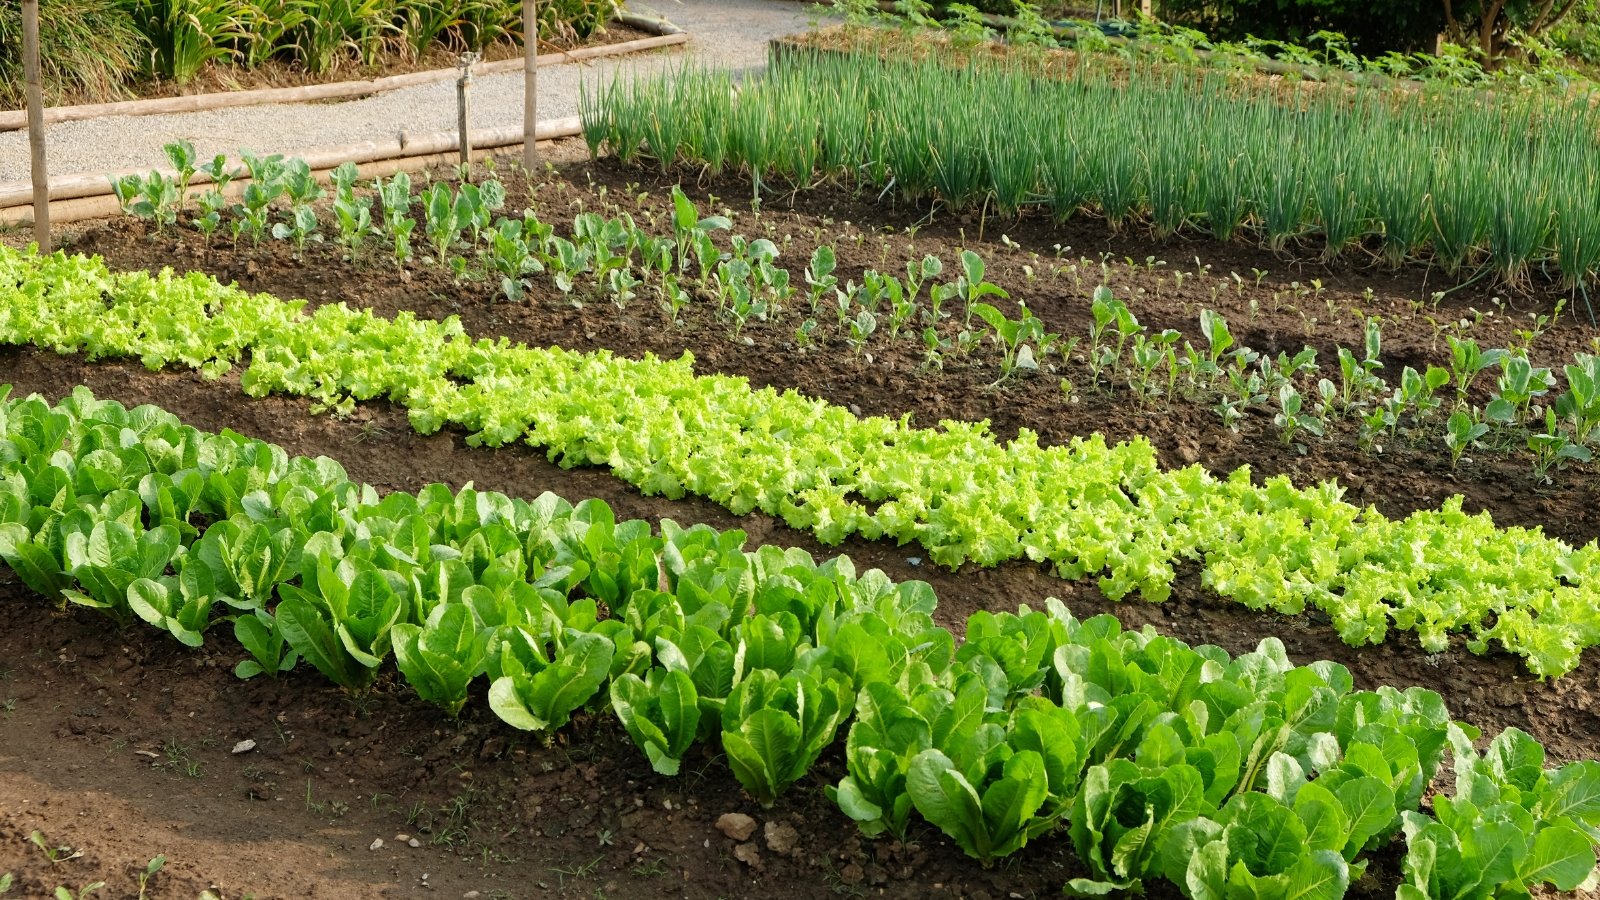 A variety of leafy greens arranged neatly in rich, dark soil, showcasing their vibrant colors and textures, ready for harvest in a lush garden bed.